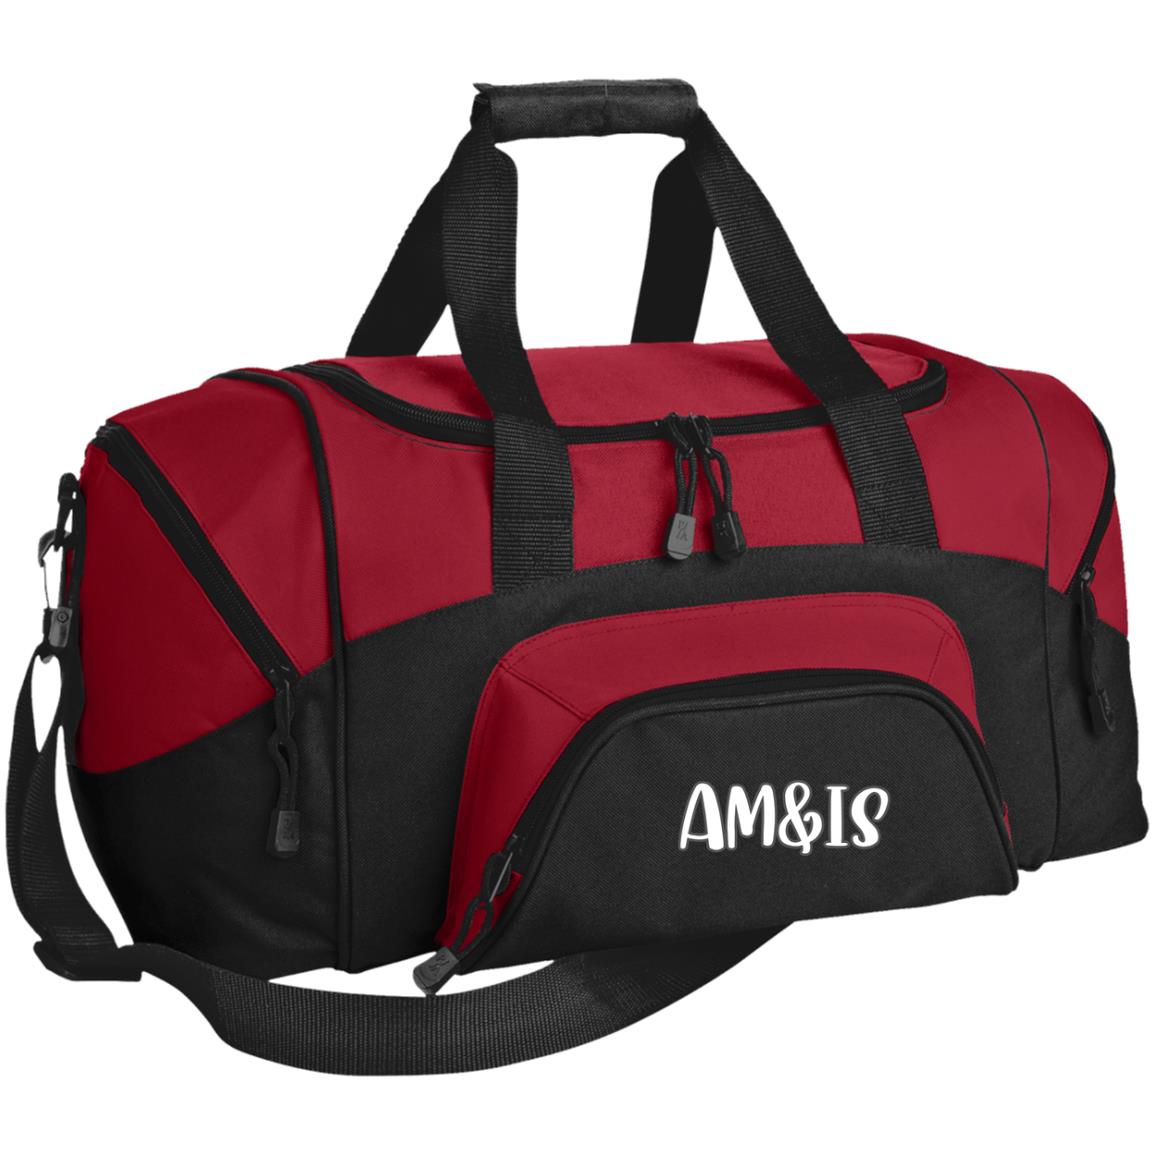 BLACK TRUE RED ONE SIZE - AM&IS Activewear Small Colorblock Sport Duffel Bag - duffel bag at TFC&H Co.